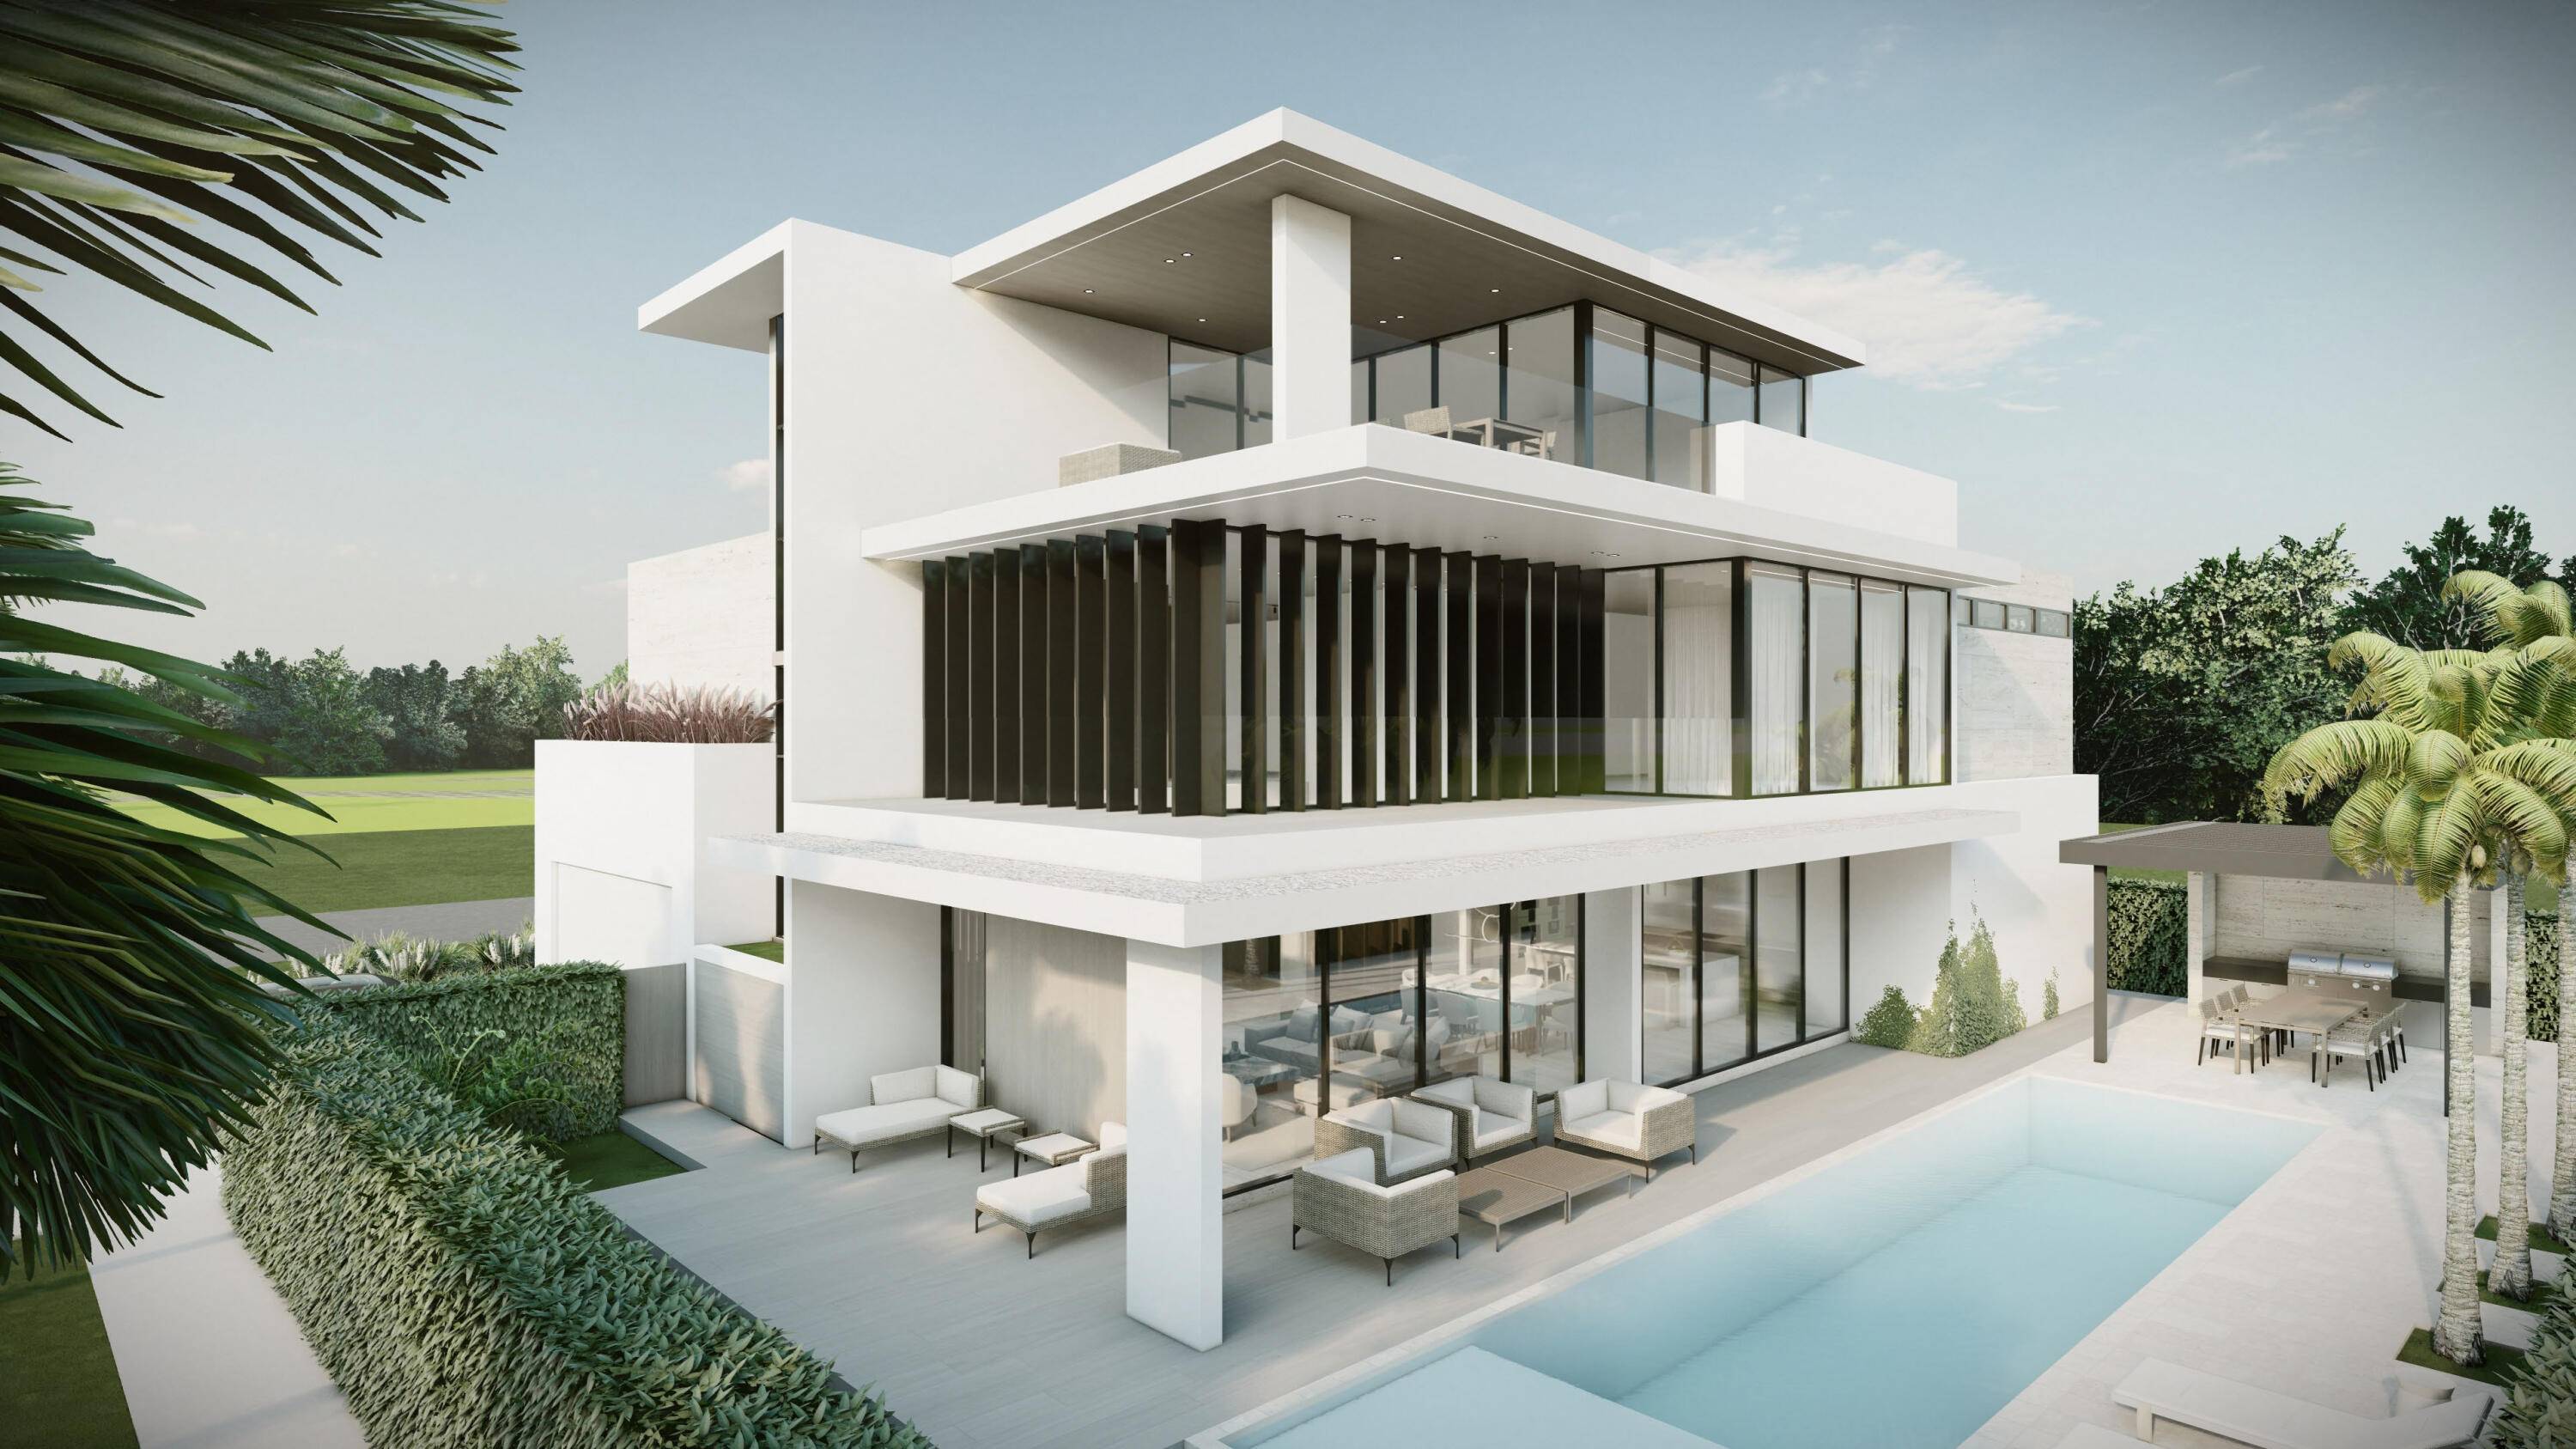 A visionary three story gem, courtesy of Empire Development, is reimagining luxury residential living in east Boca Raton.